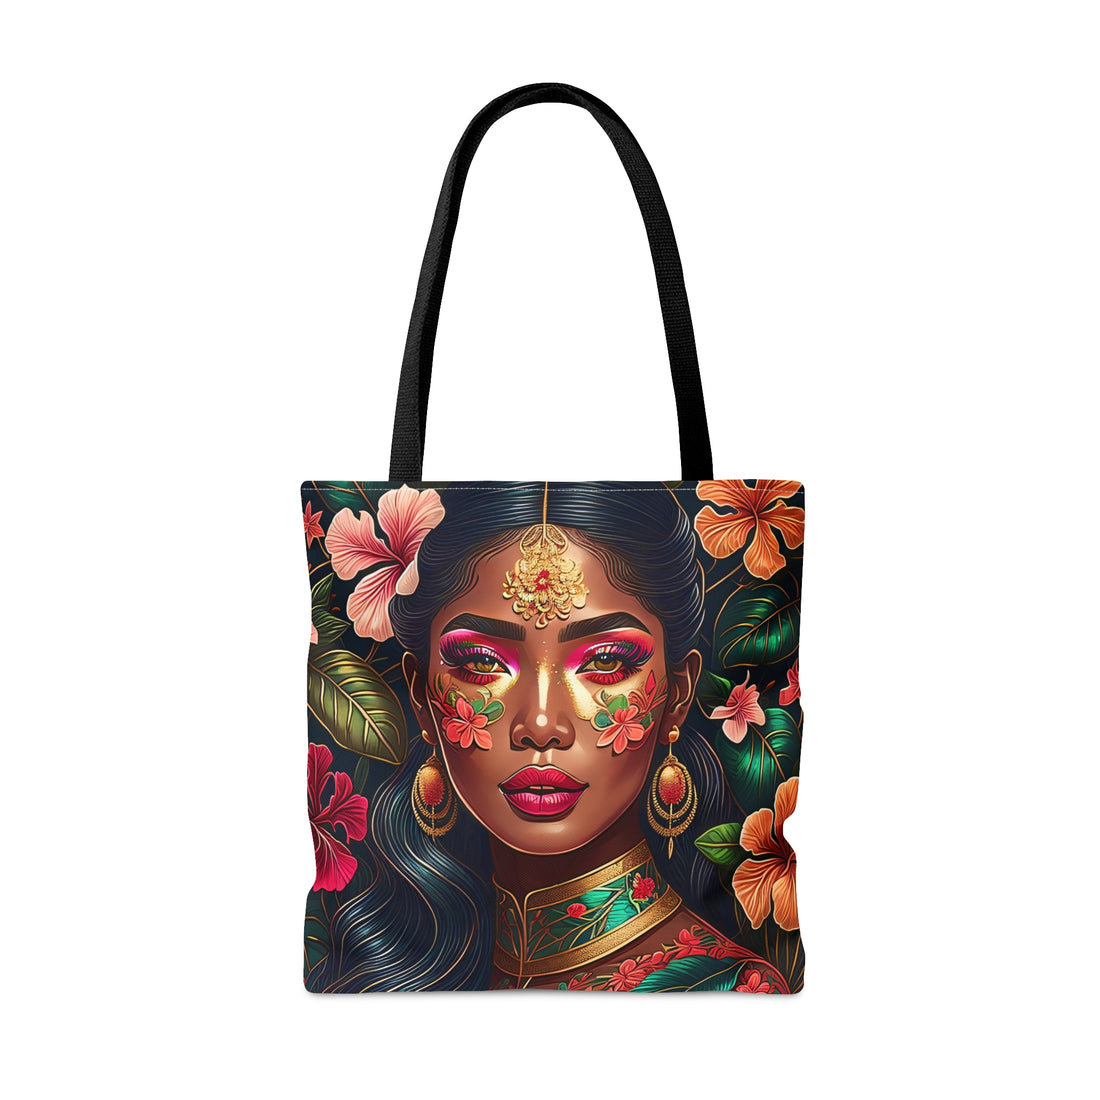 Confidence of a Heroine Tote Bag